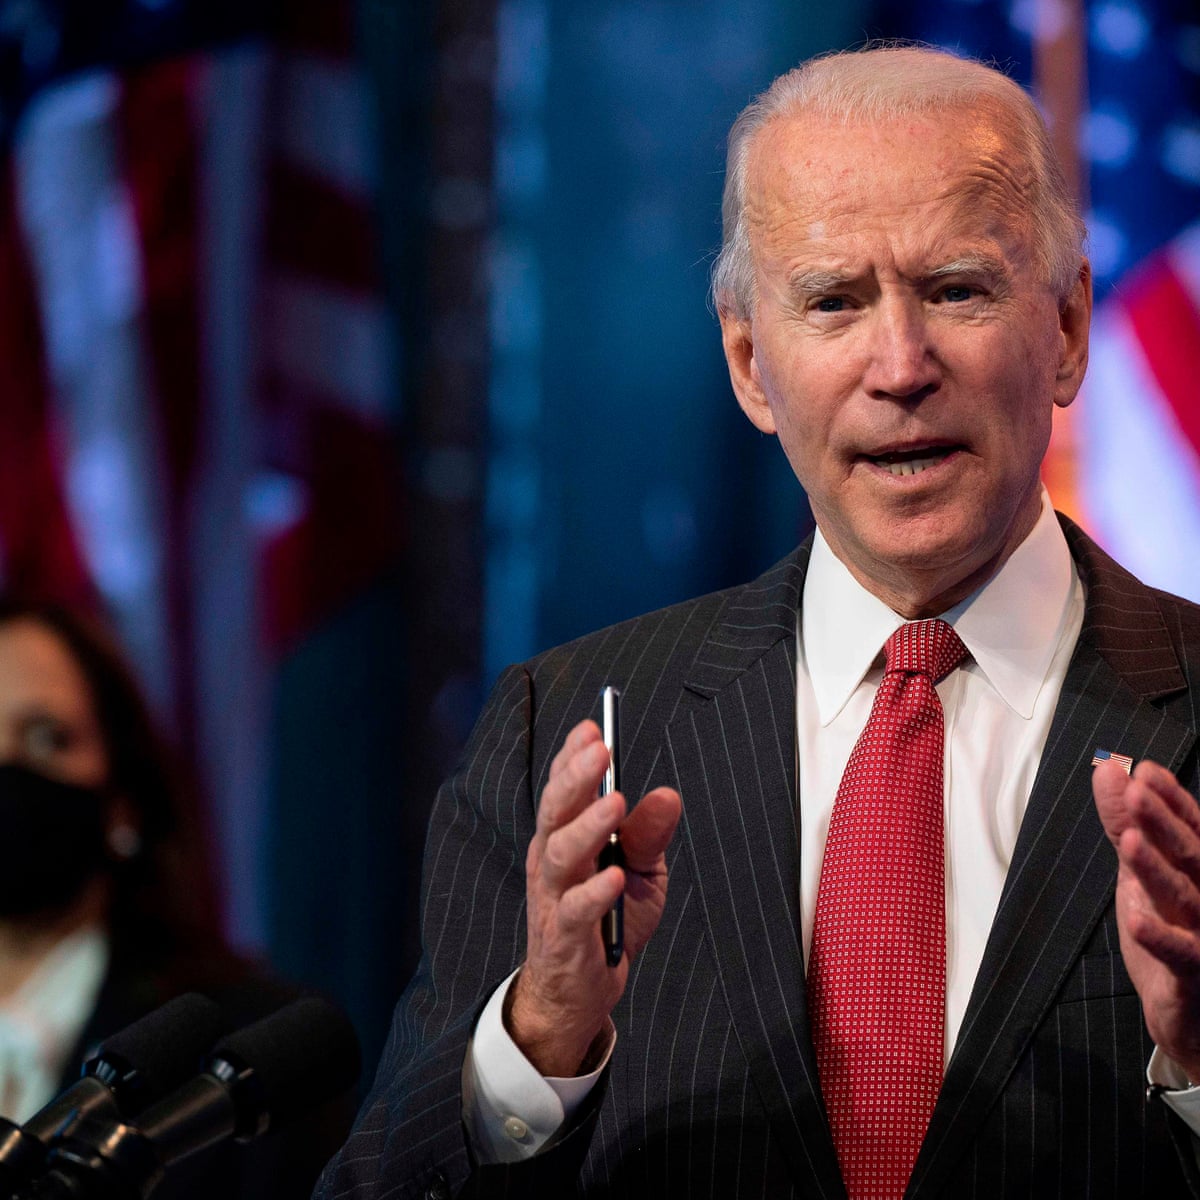 how old is vice president joe biden wife - Biden|President|Joe|Years|Trump|Delaware|Vice|Time|Obama|Senate|States|Law|Age|Campaign|Election|Administration|Family|House|Senator|Office|School|Wife|People|Hunter|University|Act|State|Year|Life|Party|Committee|Children|Beau|Daughter|War|Jill|Day|Facts|Americans|Presidency|Joe Biden|United States|Vice President|White House|Law School|President Trump|Foreign Relations Committee|Donald Trump|President Biden|Presidential Campaign|Presidential Election|Democratic Party|Syracuse University|United Nations|Net Worth|Barack Obama|Judiciary Committee|Neilia Hunter|U.S. Senate|Hillary Clinton|New York Times|Obama Administration|Empty Store Shelves|Systemic Racism|Castle County Council|Archmere Academy|U.S. Senator|Vice Presidency|Second Term|Biden Administration